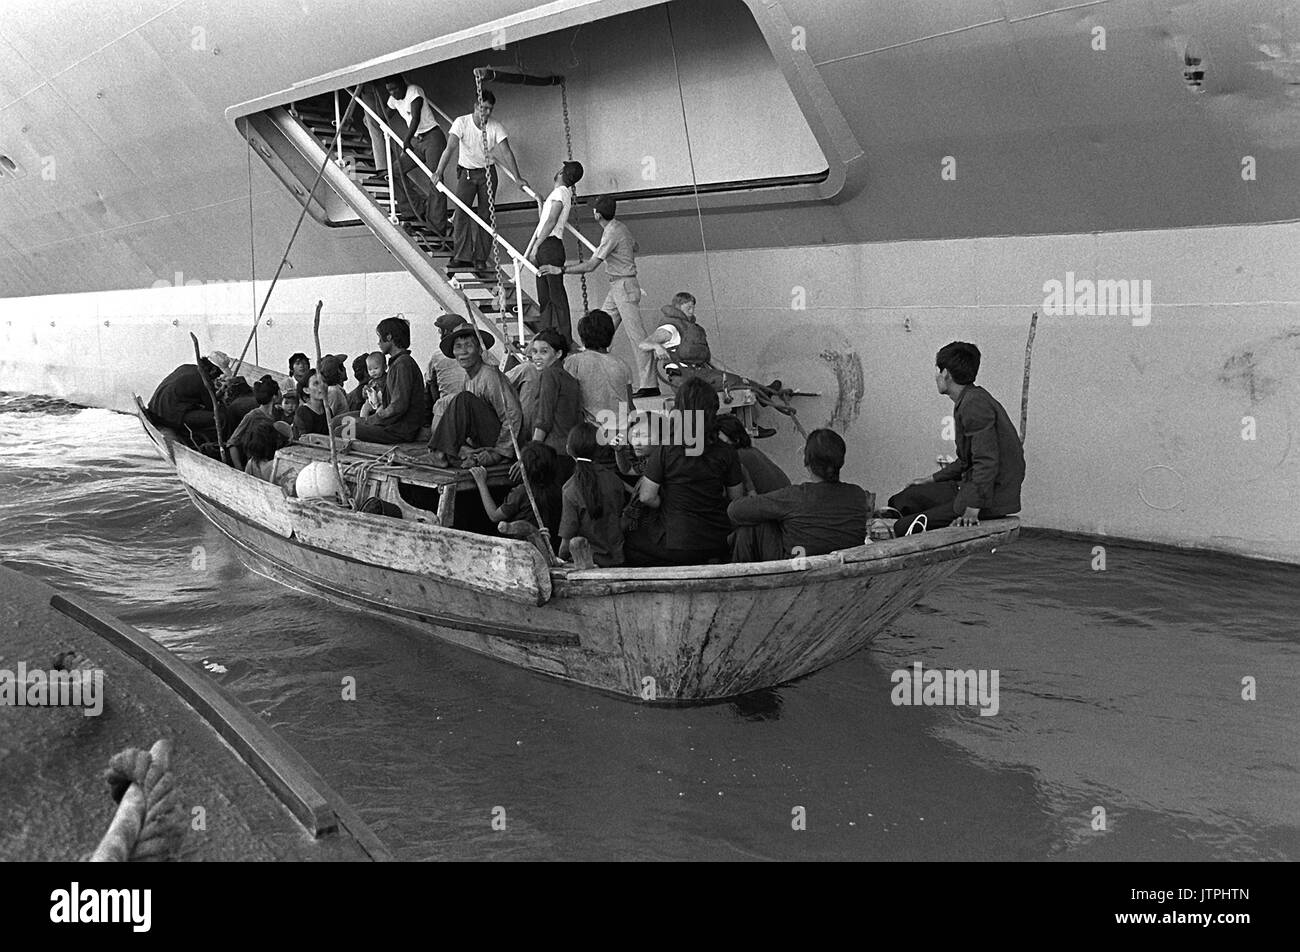 Vietnamese refugees prepare to come aboard the USS BLUE RIDGE (LCC-19).  The refugees were rescued by the amphibious command ship 350 miles northeast of Cam Ranh Bay, Vietnam, after eight days at sea in a 35 foot fishing boat. Stock Photo